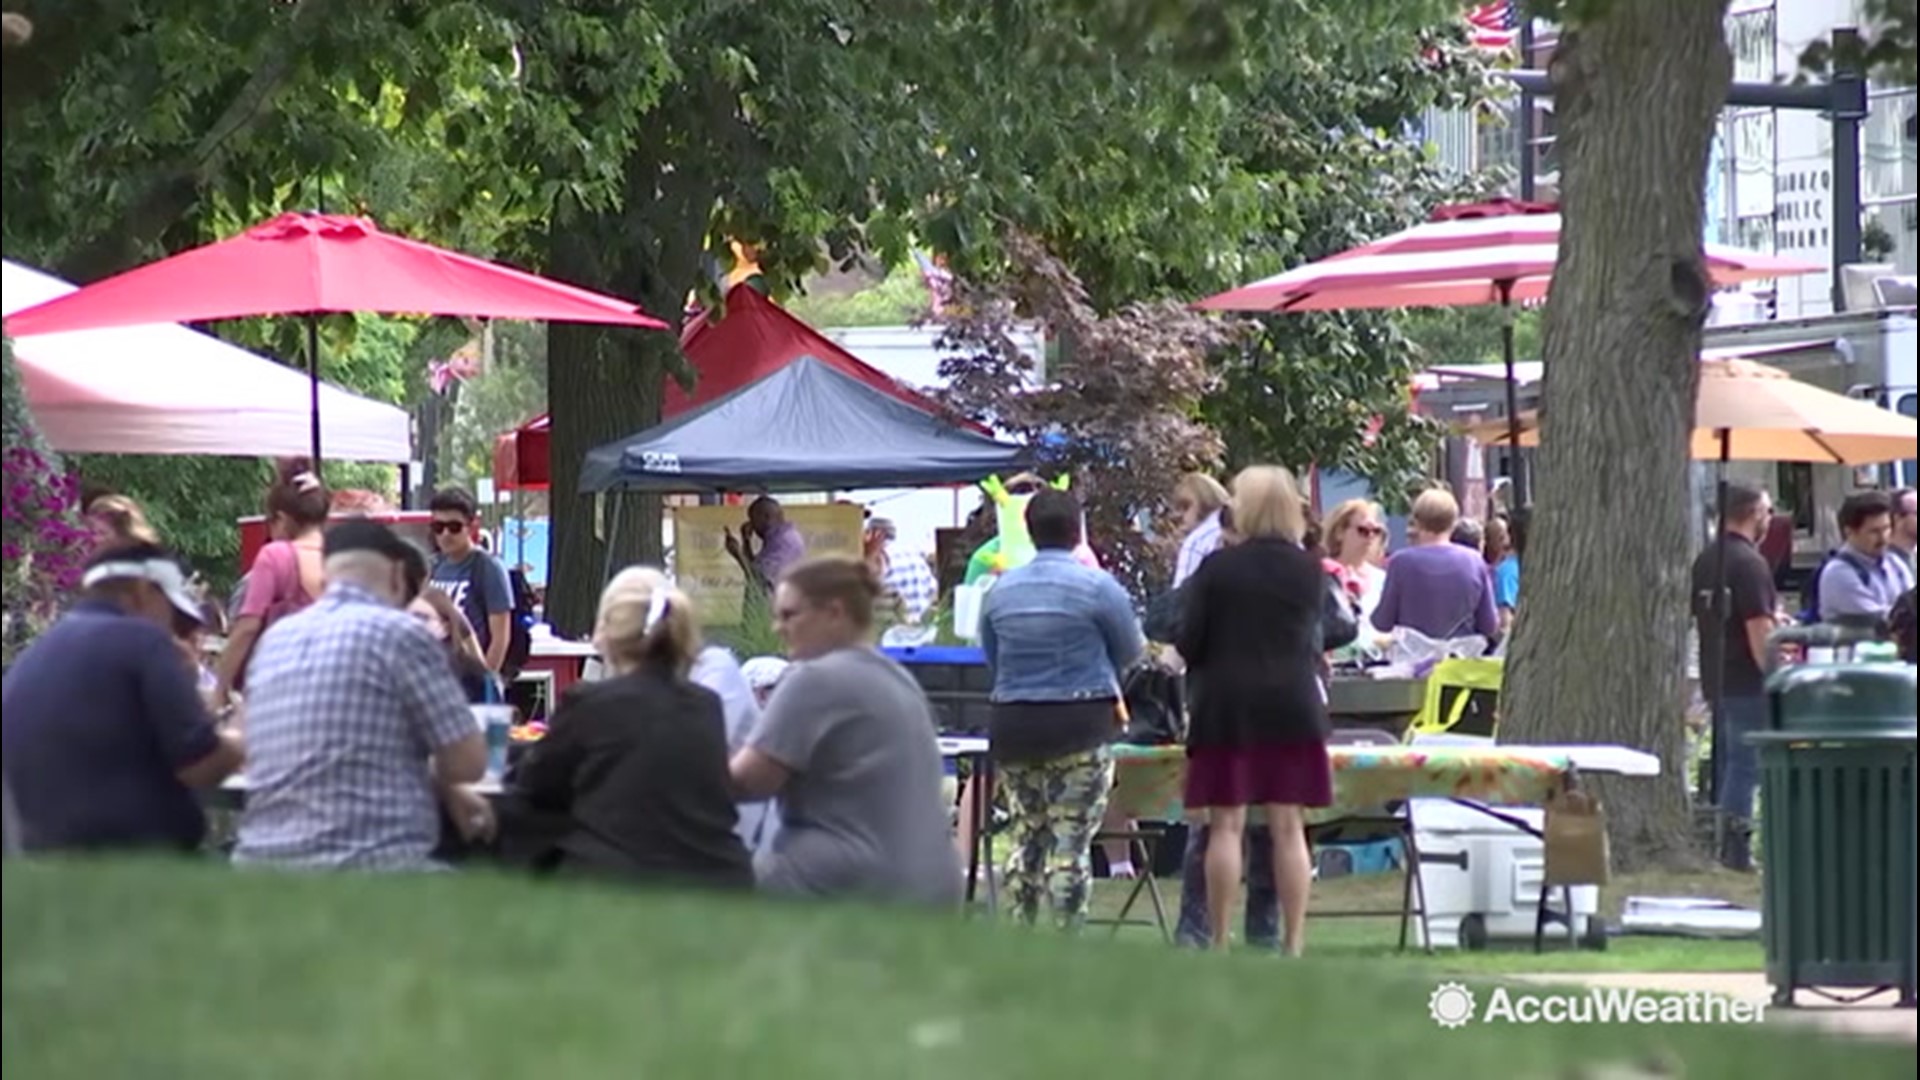 With a considerable drop in heat and humidity over the next few days, people turned out in droves to take up the weekly food trucks in Kalamazoo, Michigan, Friday afternoon.